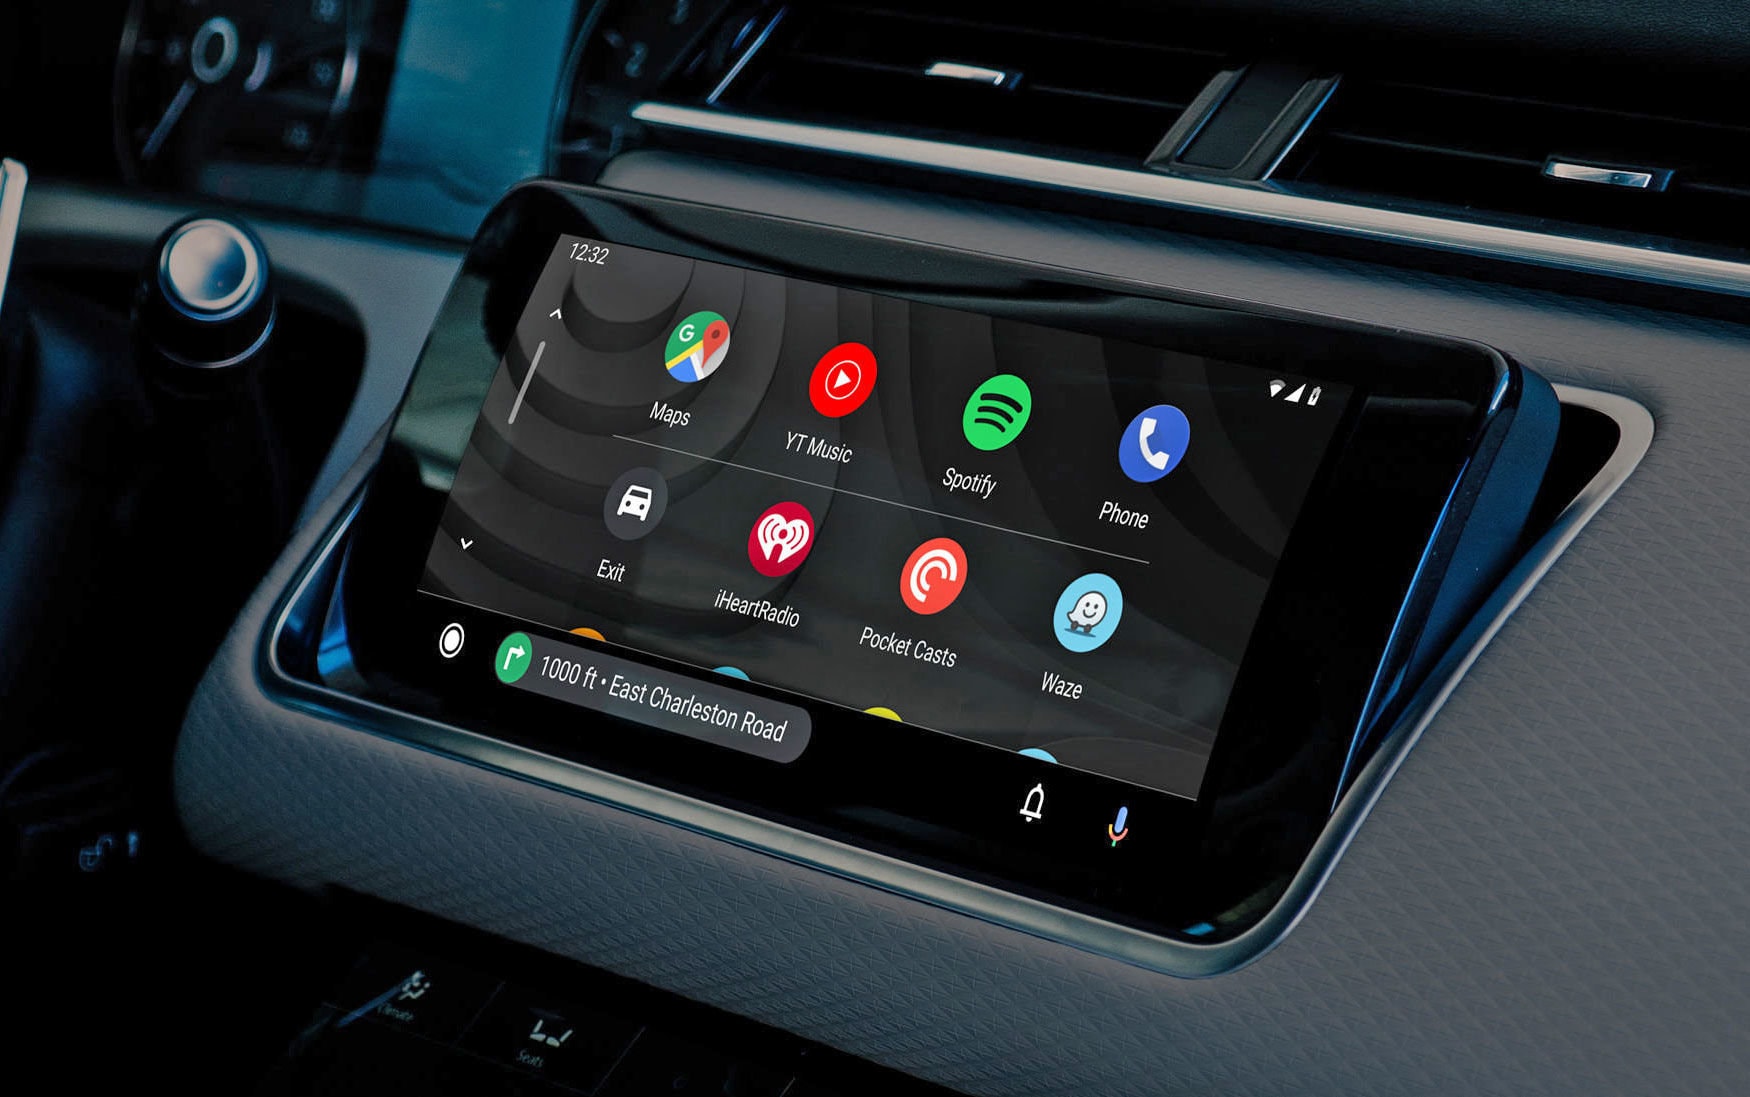 How to use wireless Android Auto